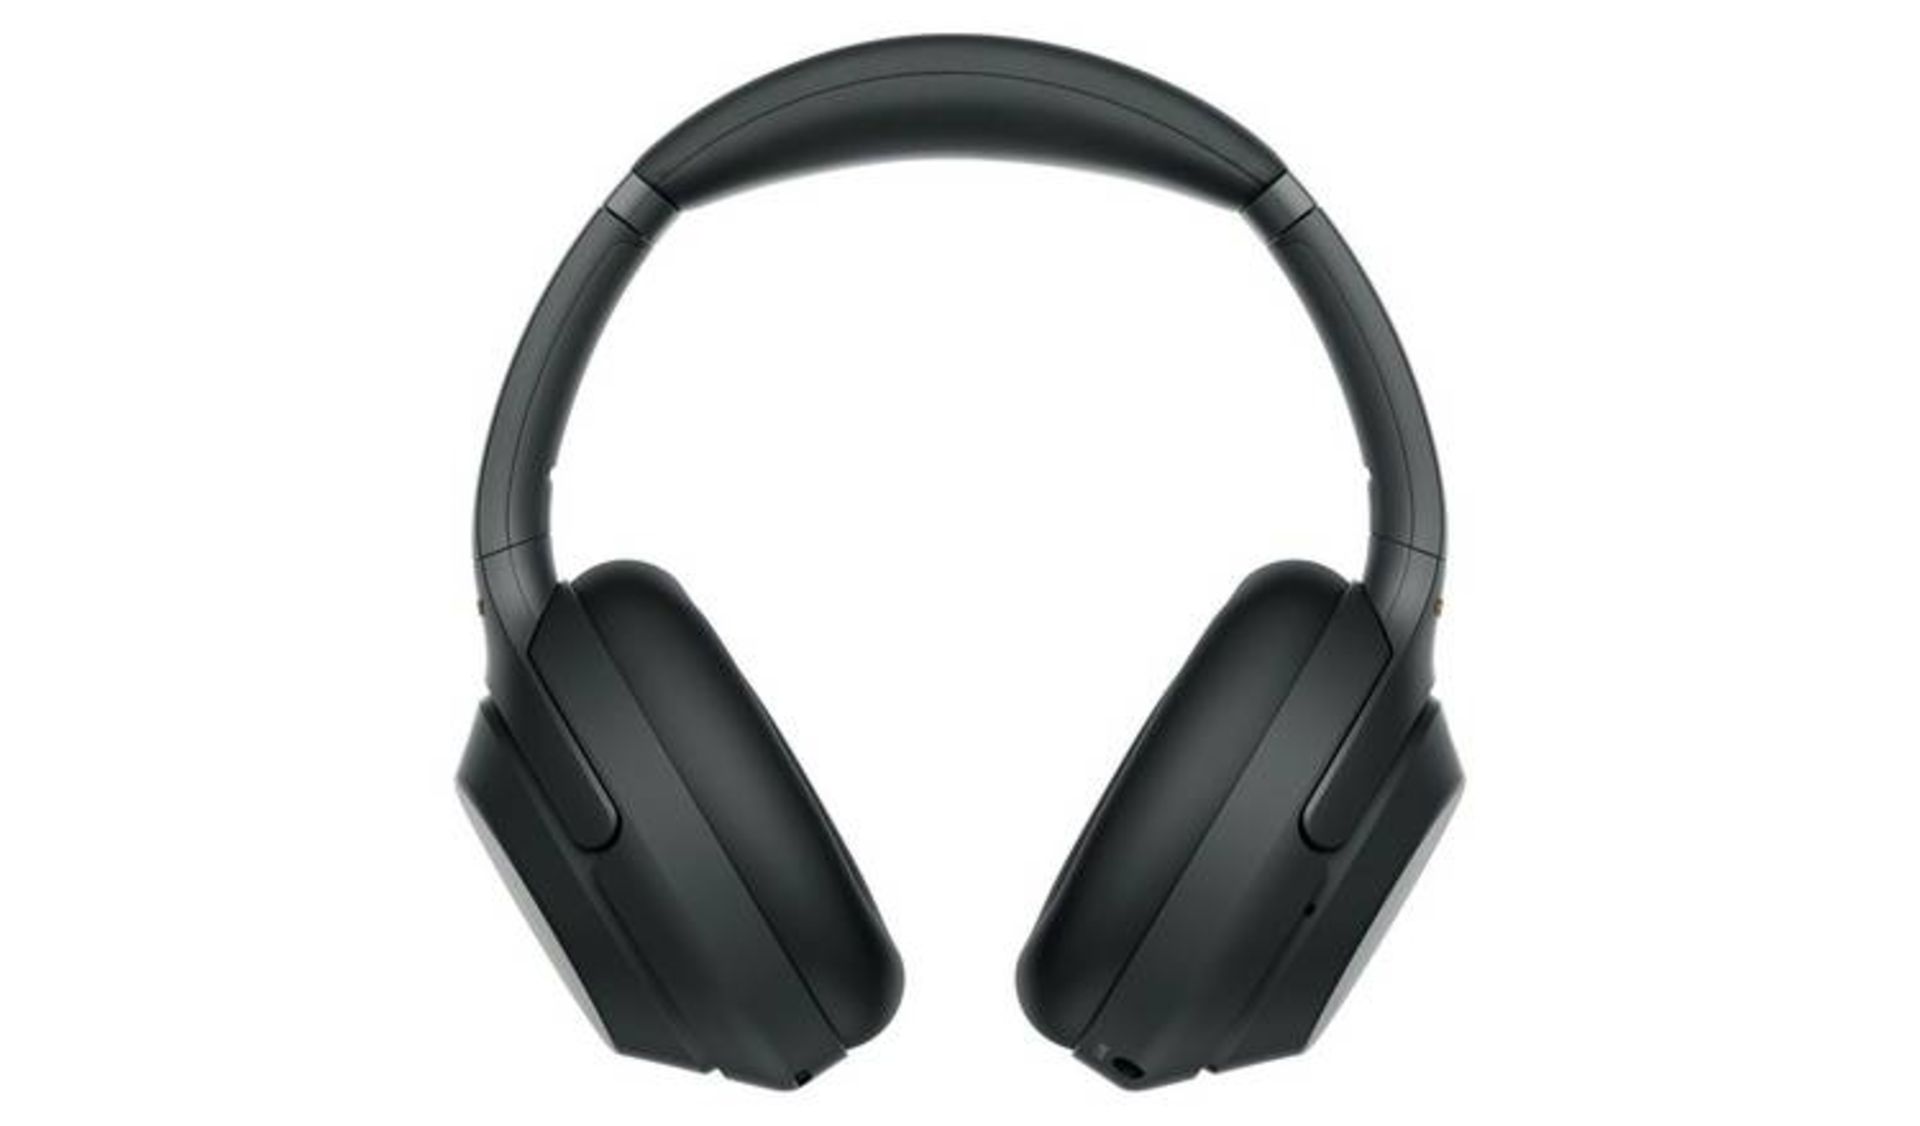 AS NEW CONDITION SONY WH-1000XM3 ON-EAR WIRELESS HEADPHONES - BLACK *NO VAT* - Image 2 of 9